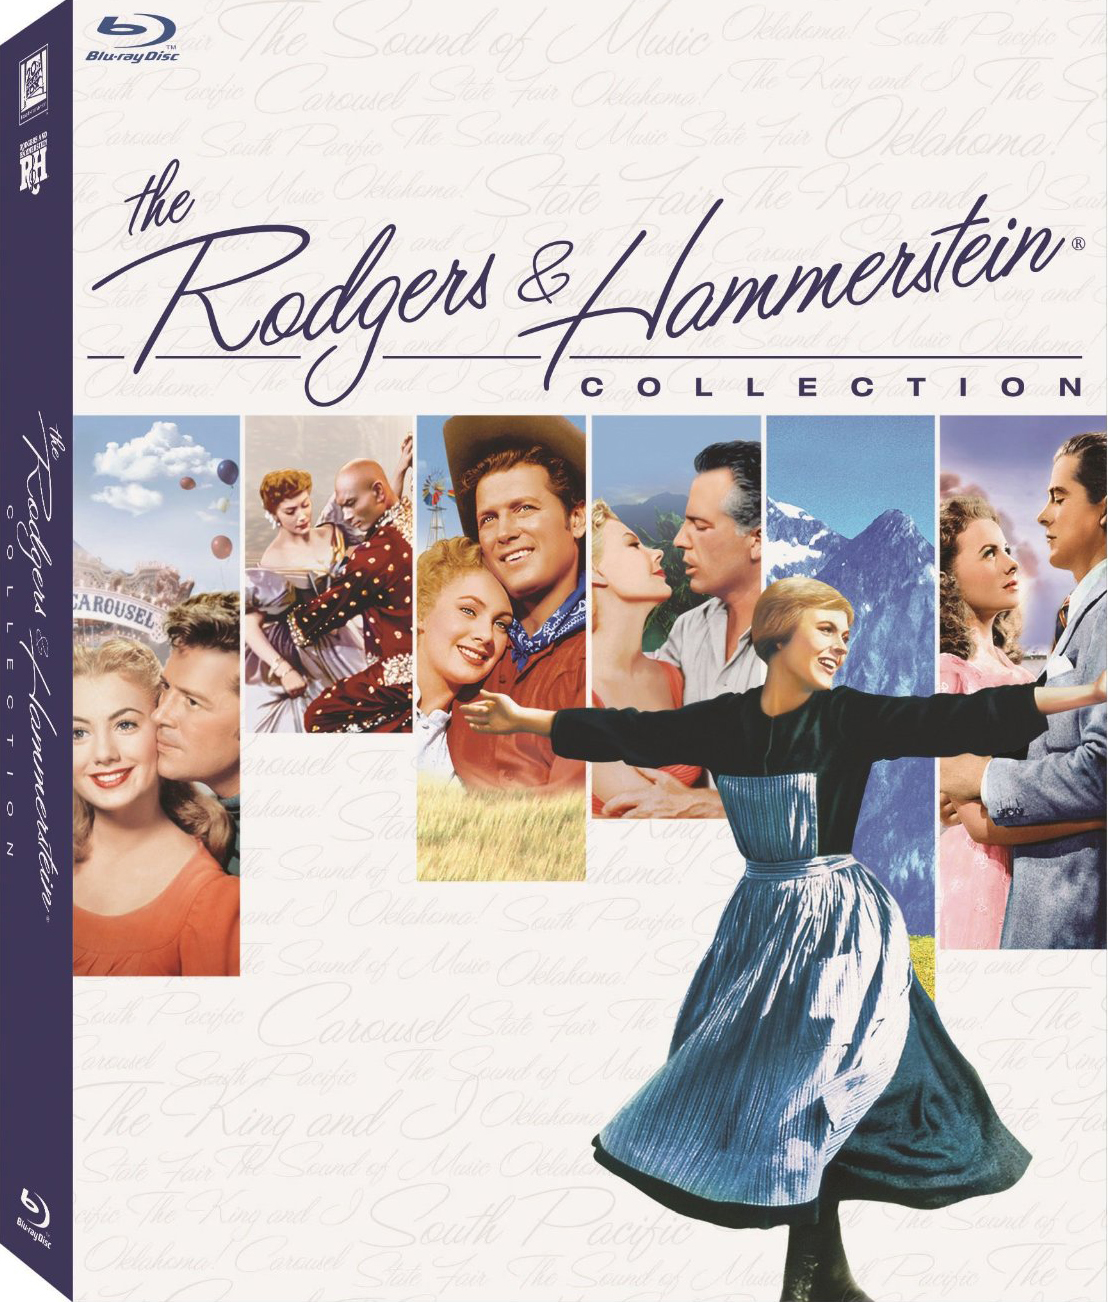 Rodgers & Hammerstein, The